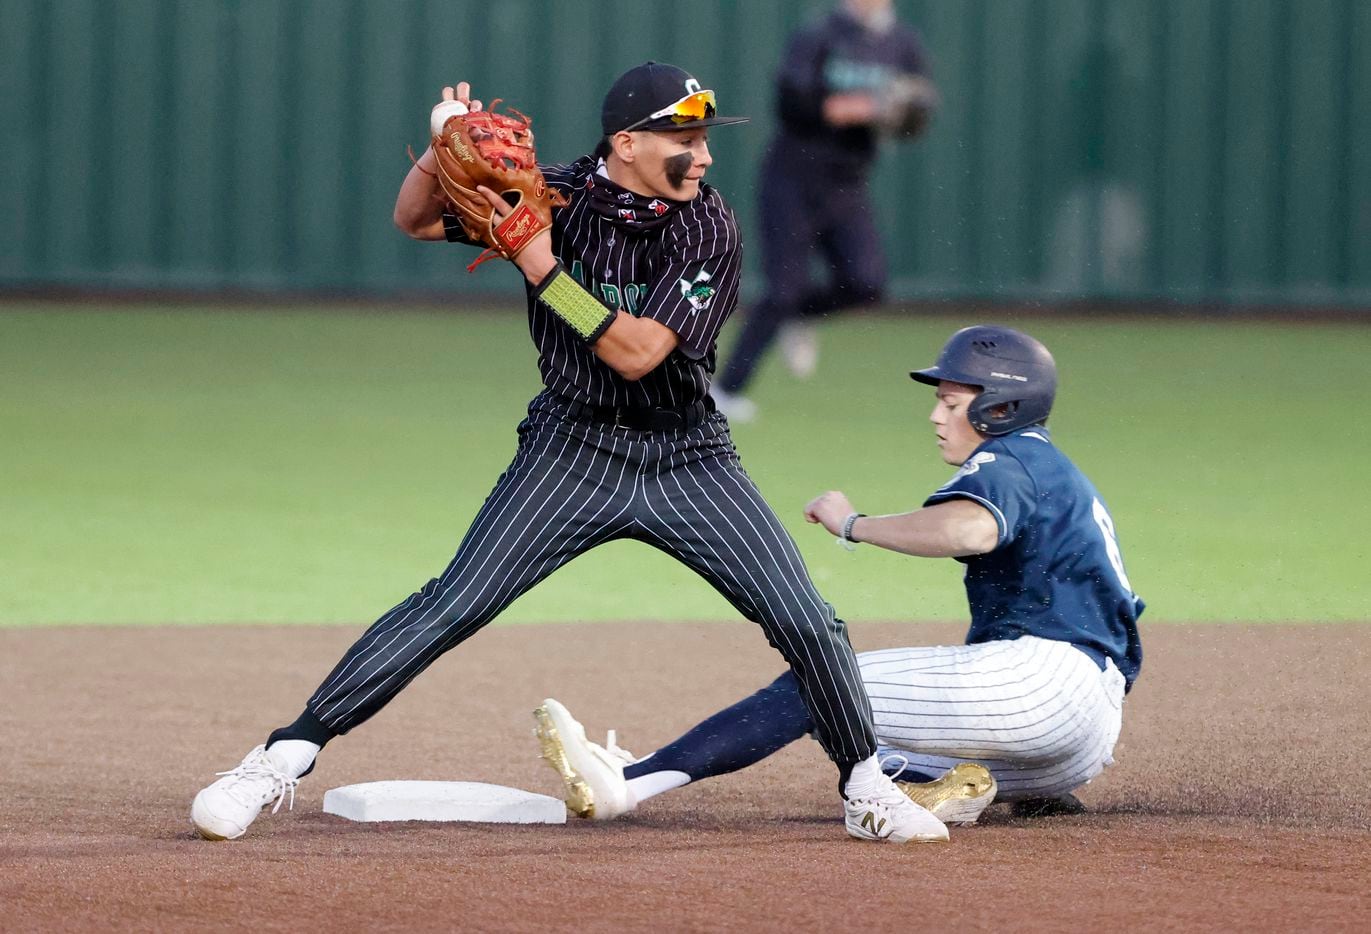 Southlake’s Ethan Mendoza forces out Keller’s Griffin Barton (6) during the fourth inning of their Class District 4-6A baseball game in Souhtlake, Texas on March 19, 2021. (Michael Ainsworth/Special Contributor)